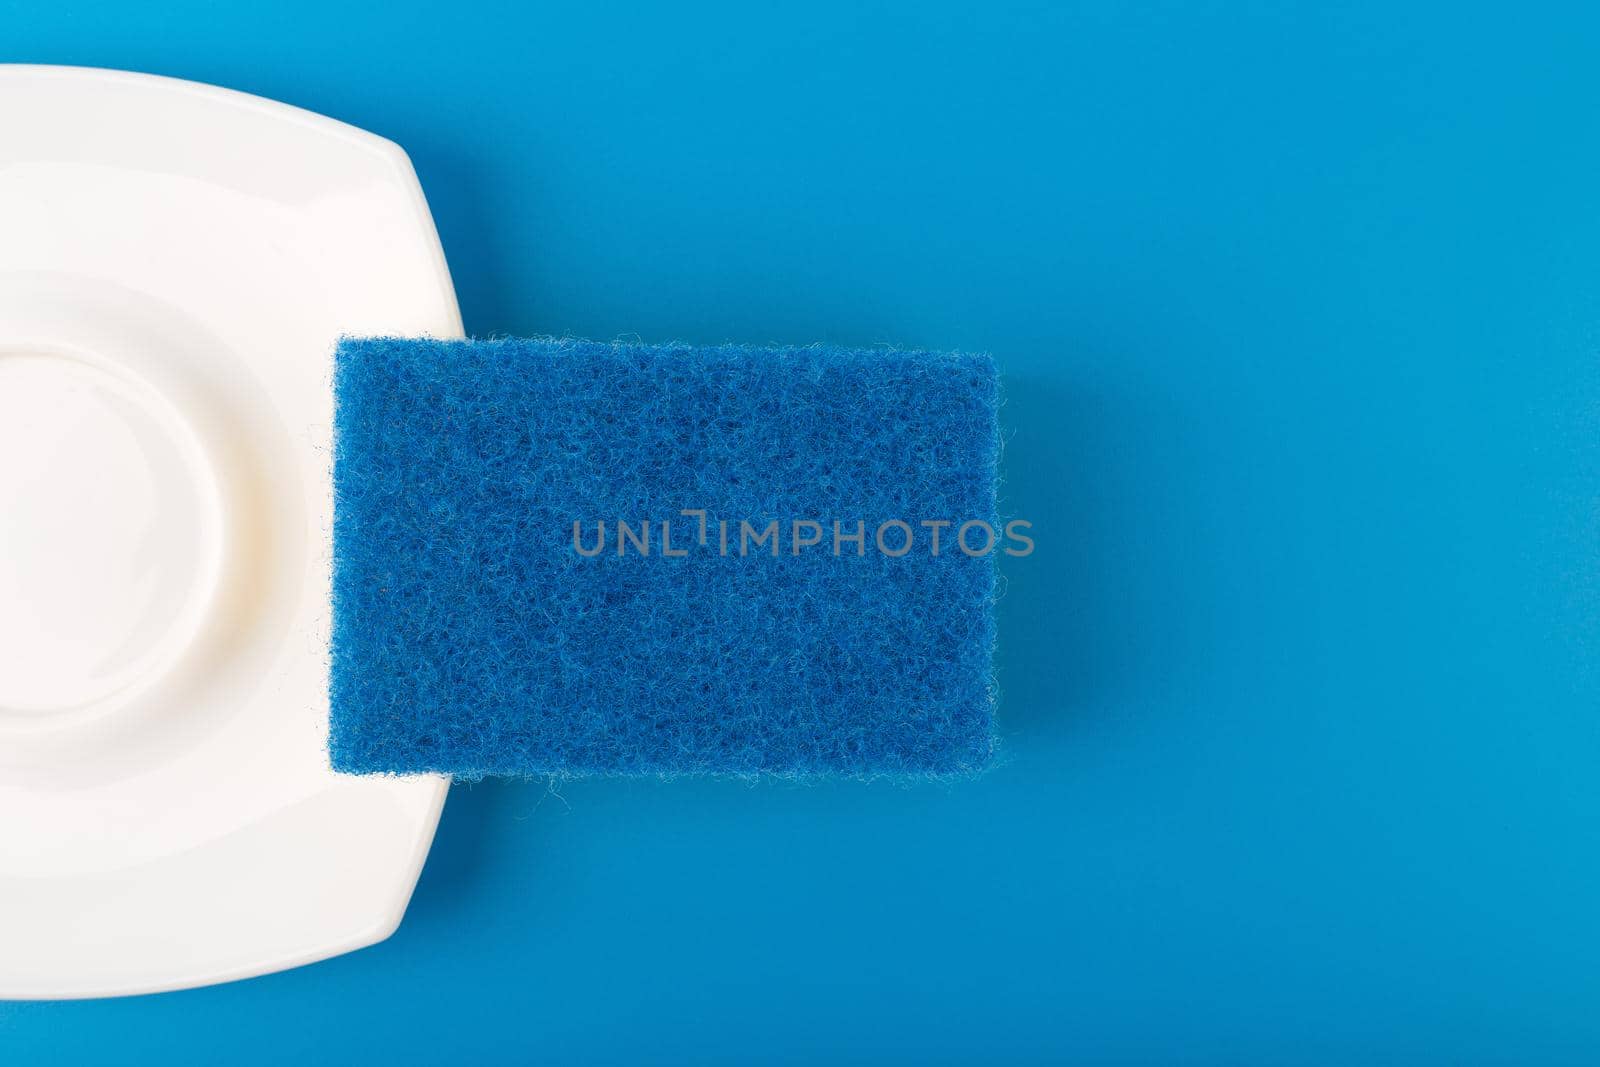 Dishwashing minimal creative concept. Close up of white shiny clean plate and blue cleaning sponge against blue background with copy space.